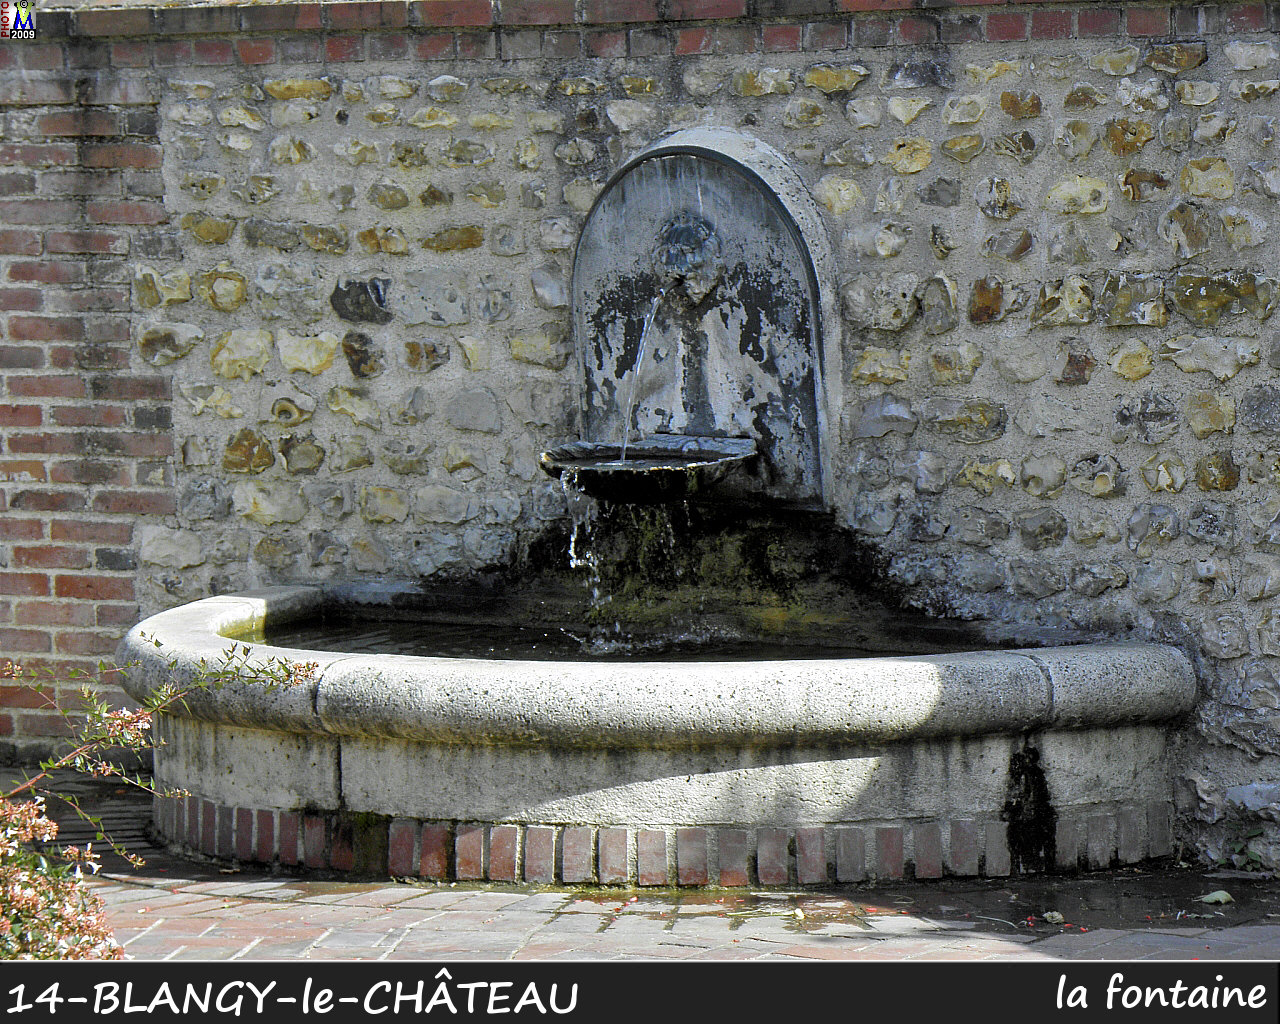 14BLANGY-le-CHATEAU_fontaine_100.jpg